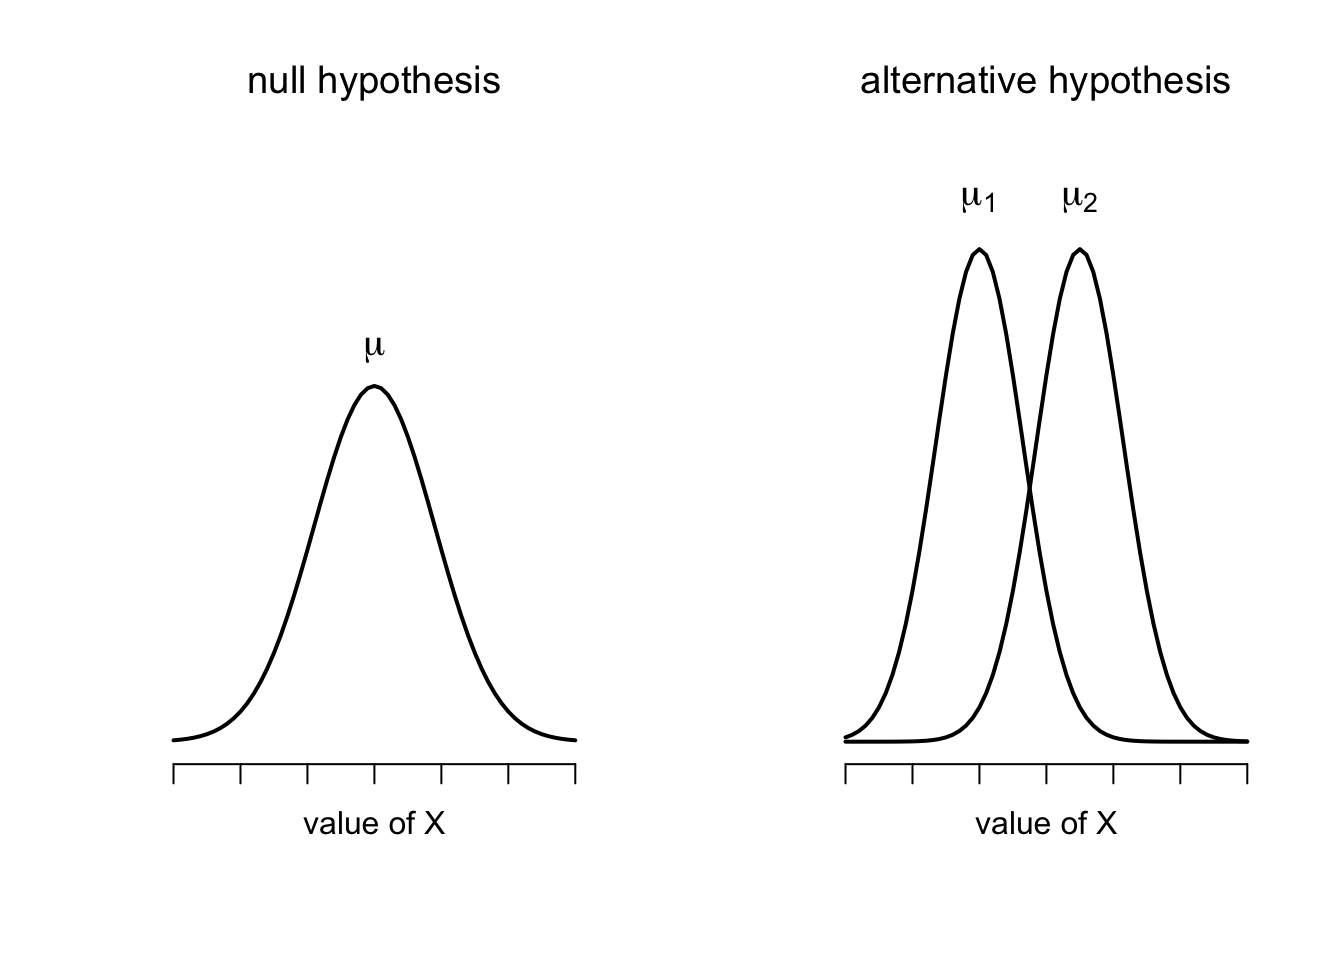 Graphical illustration of the null and alternative hypotheses assumed by the Student $t$-test. The null hypothesis assumes that both groups have the same mean $\mu$, whereas the alternative assumes that they have different means $\mu_1$ and $\mu_2$. Notice that it is assumed that the population distributions are normal, and that, although the alternative hypothesis allows the group to have different means, it assumes they have the same standard deviation